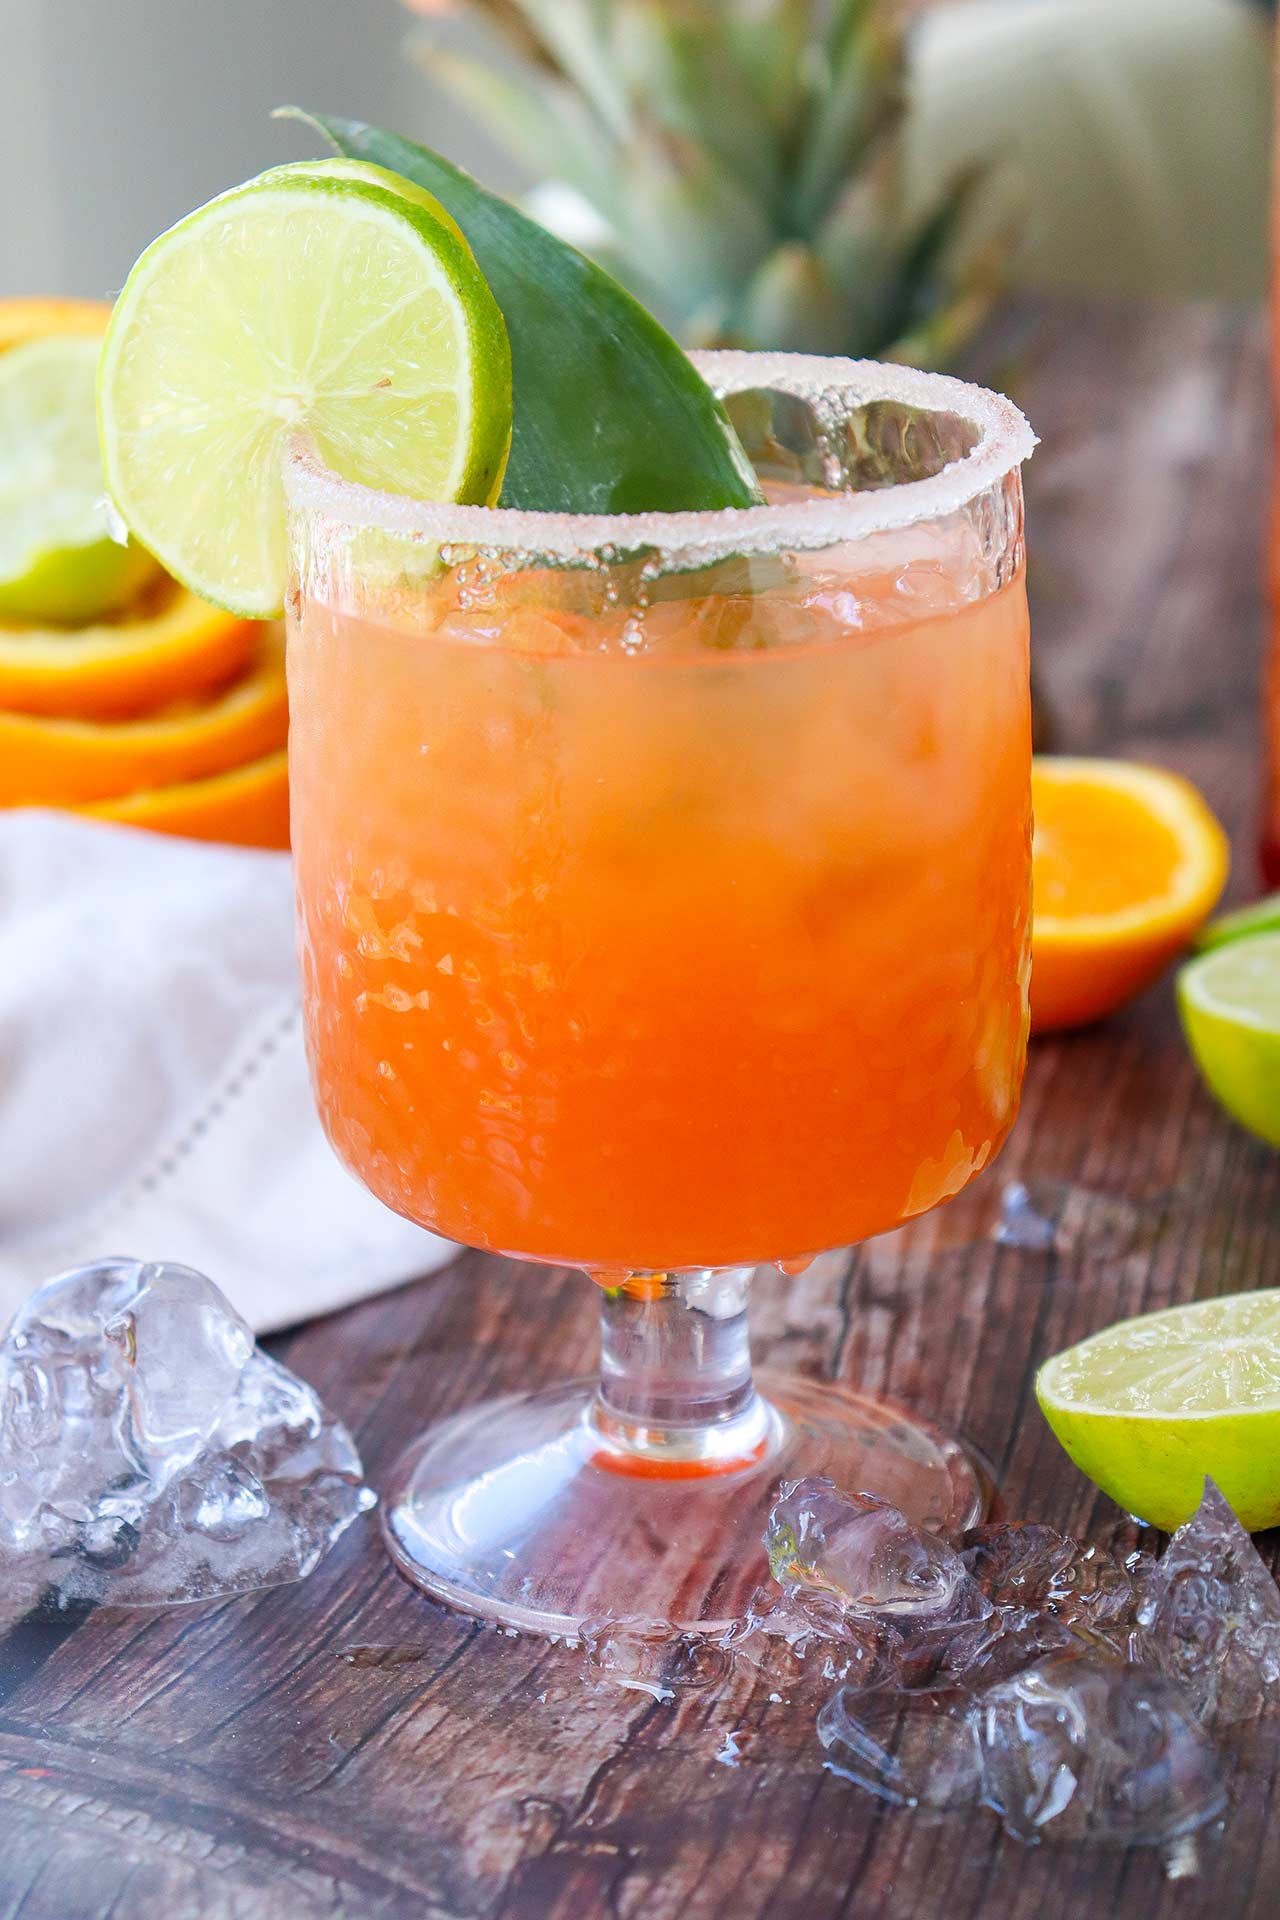 A side view of a glass of Tequila Sunrise Mocktail garnished with a lime slice.